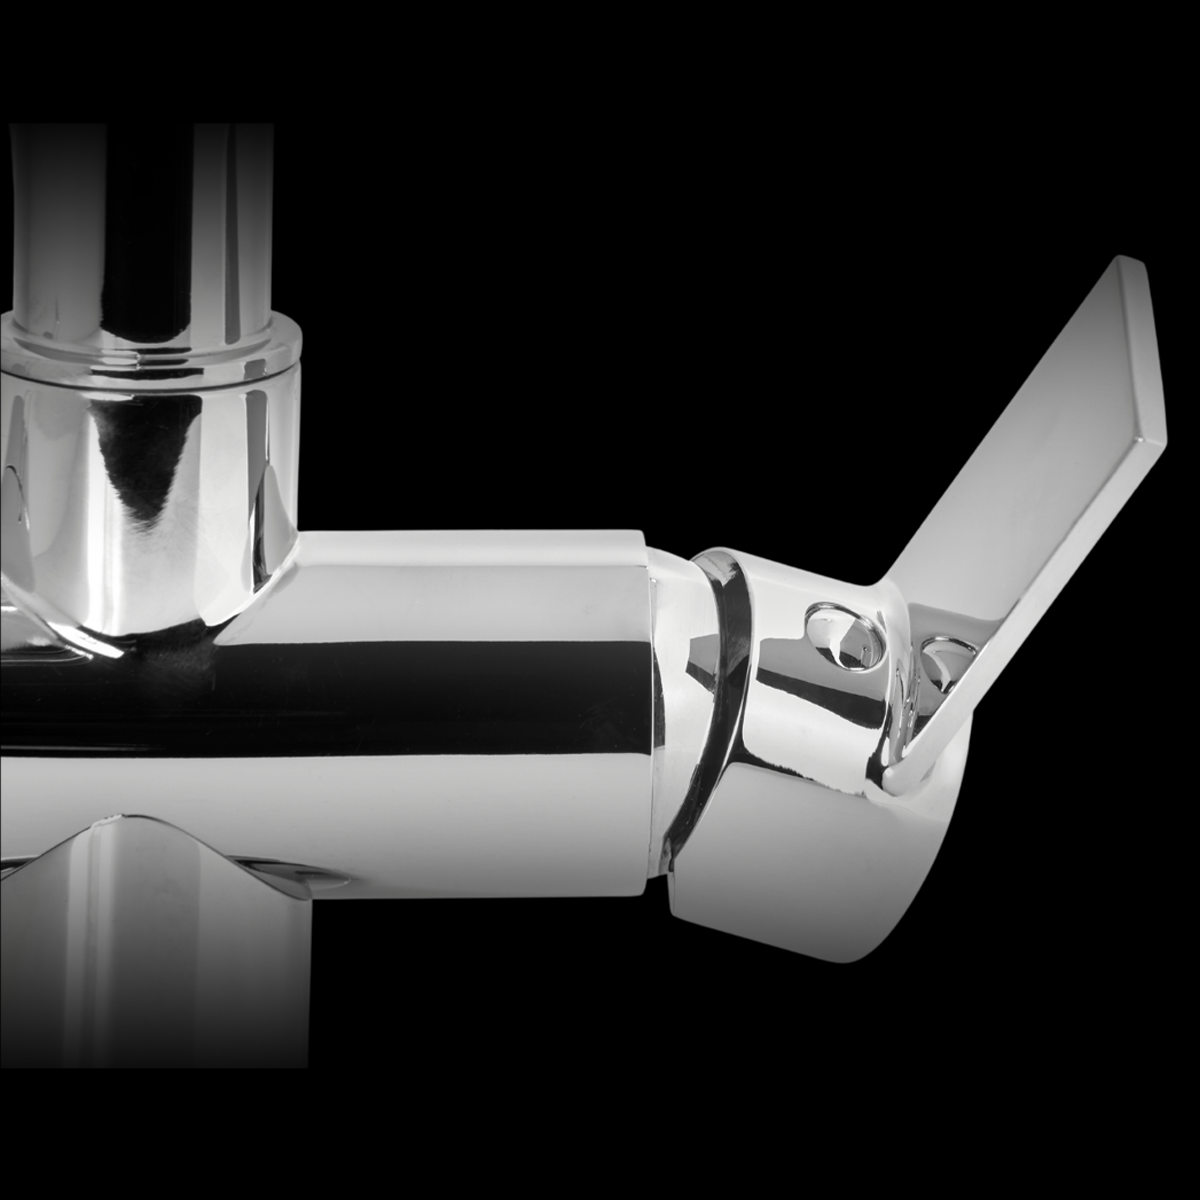 Aries-close-up-3-way-taps-product-images